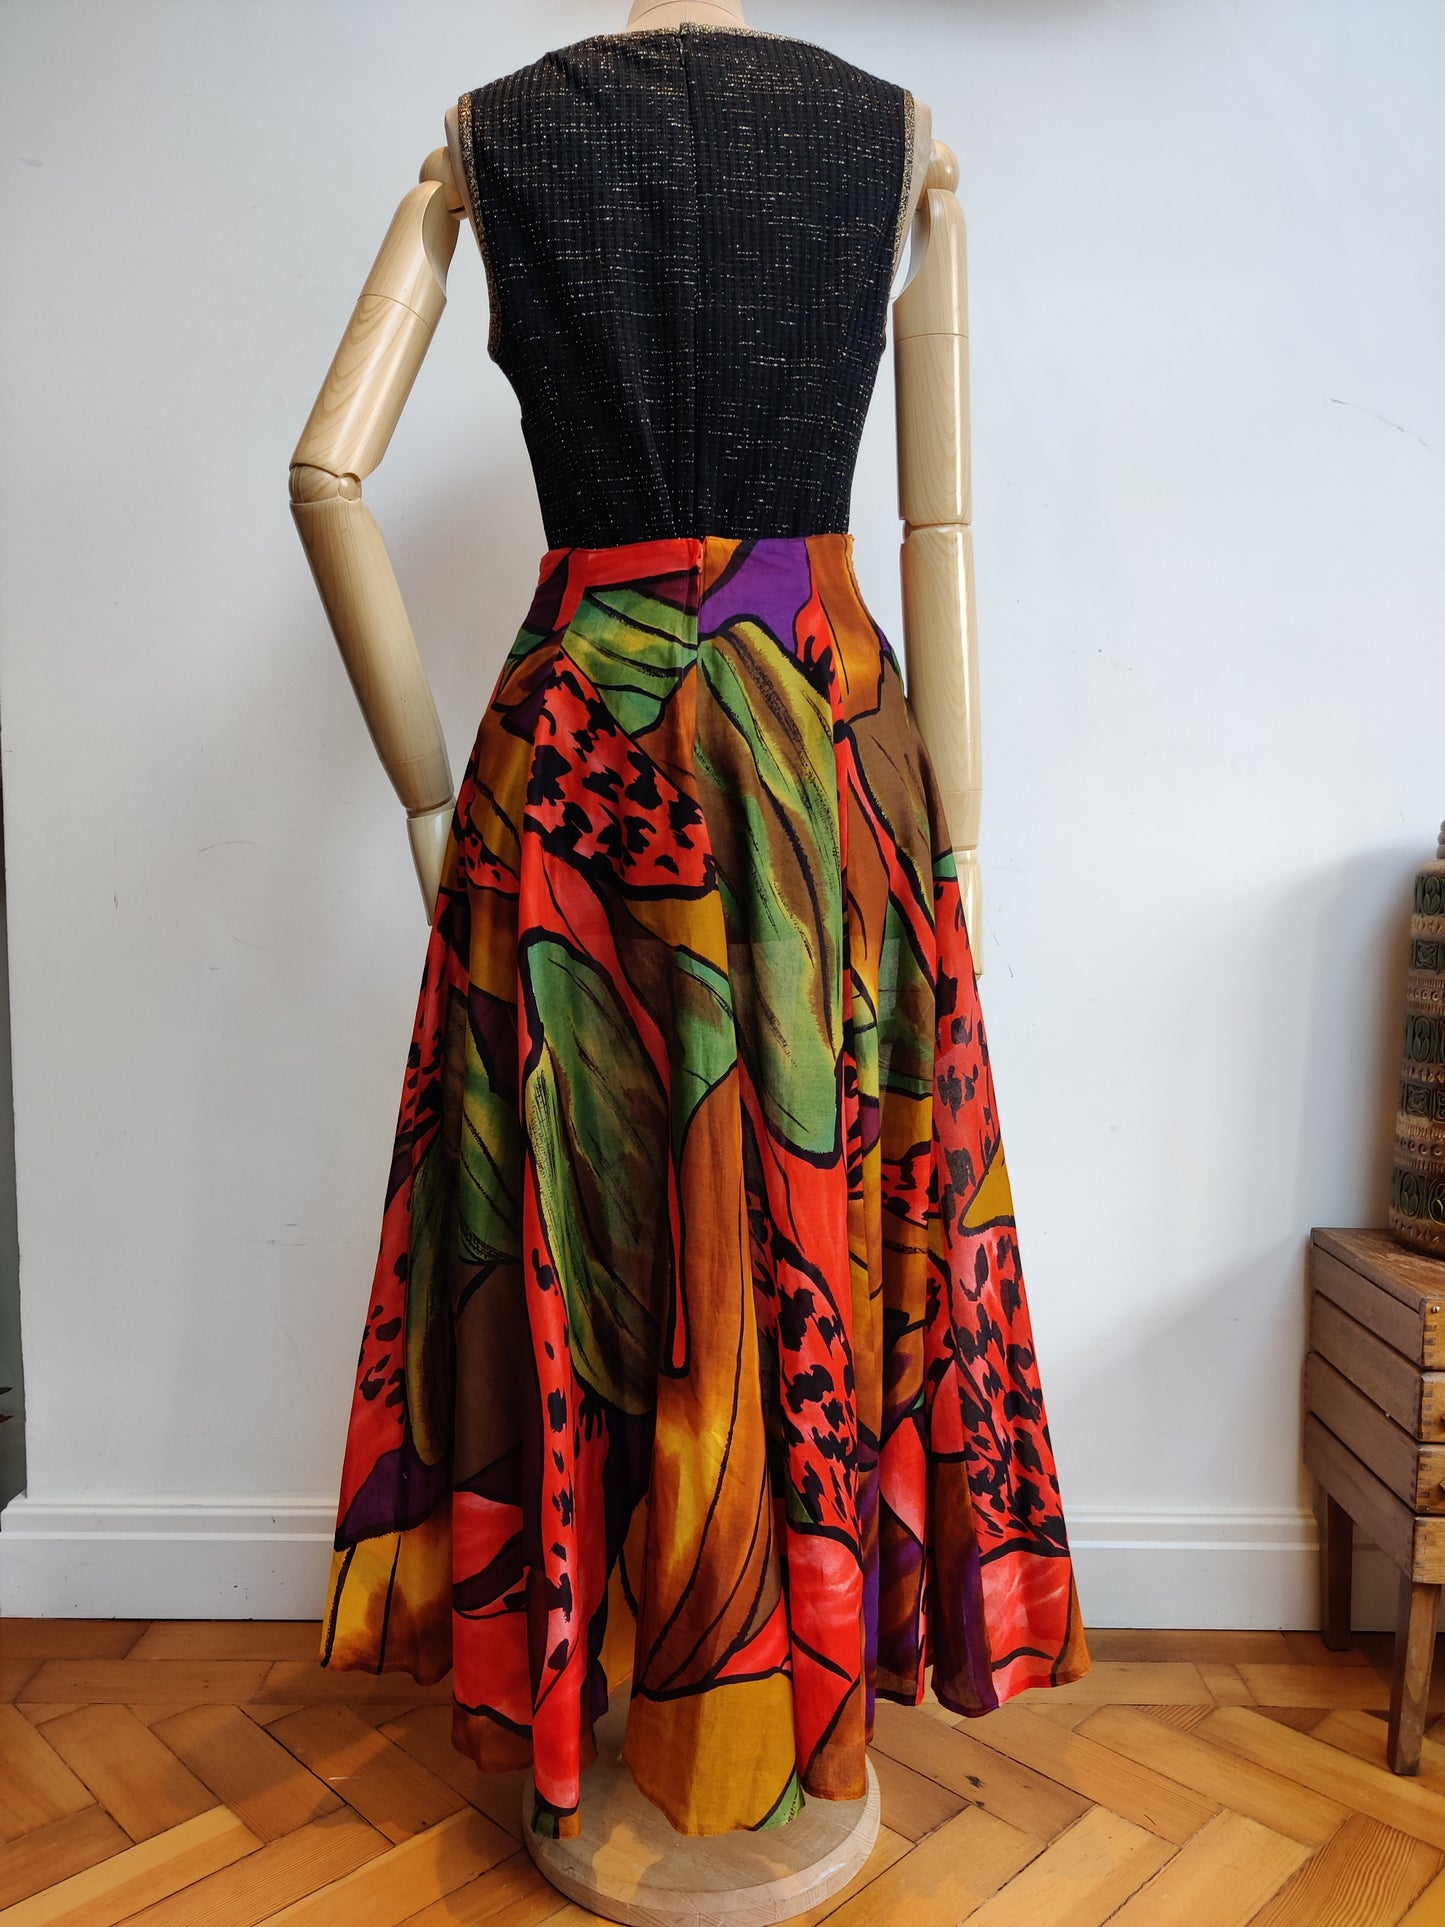 Amazing full 80s skirt with colourful retro print